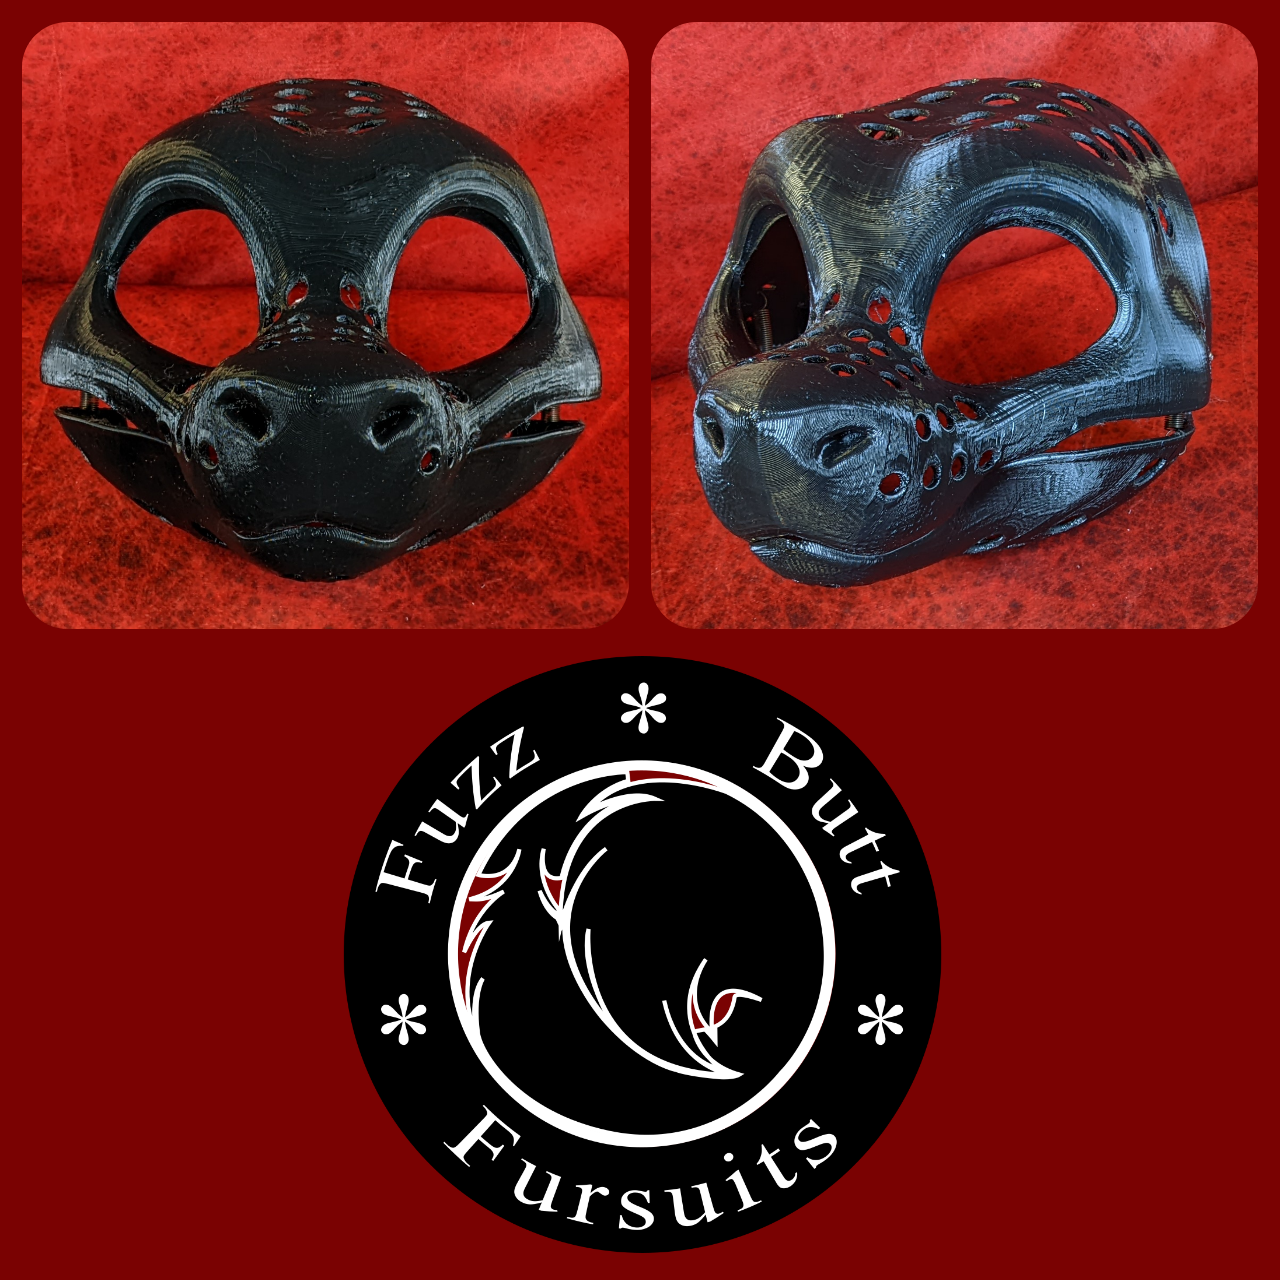 Gender Neutral Toony Round-nosed Dragon Head Base Variant 1